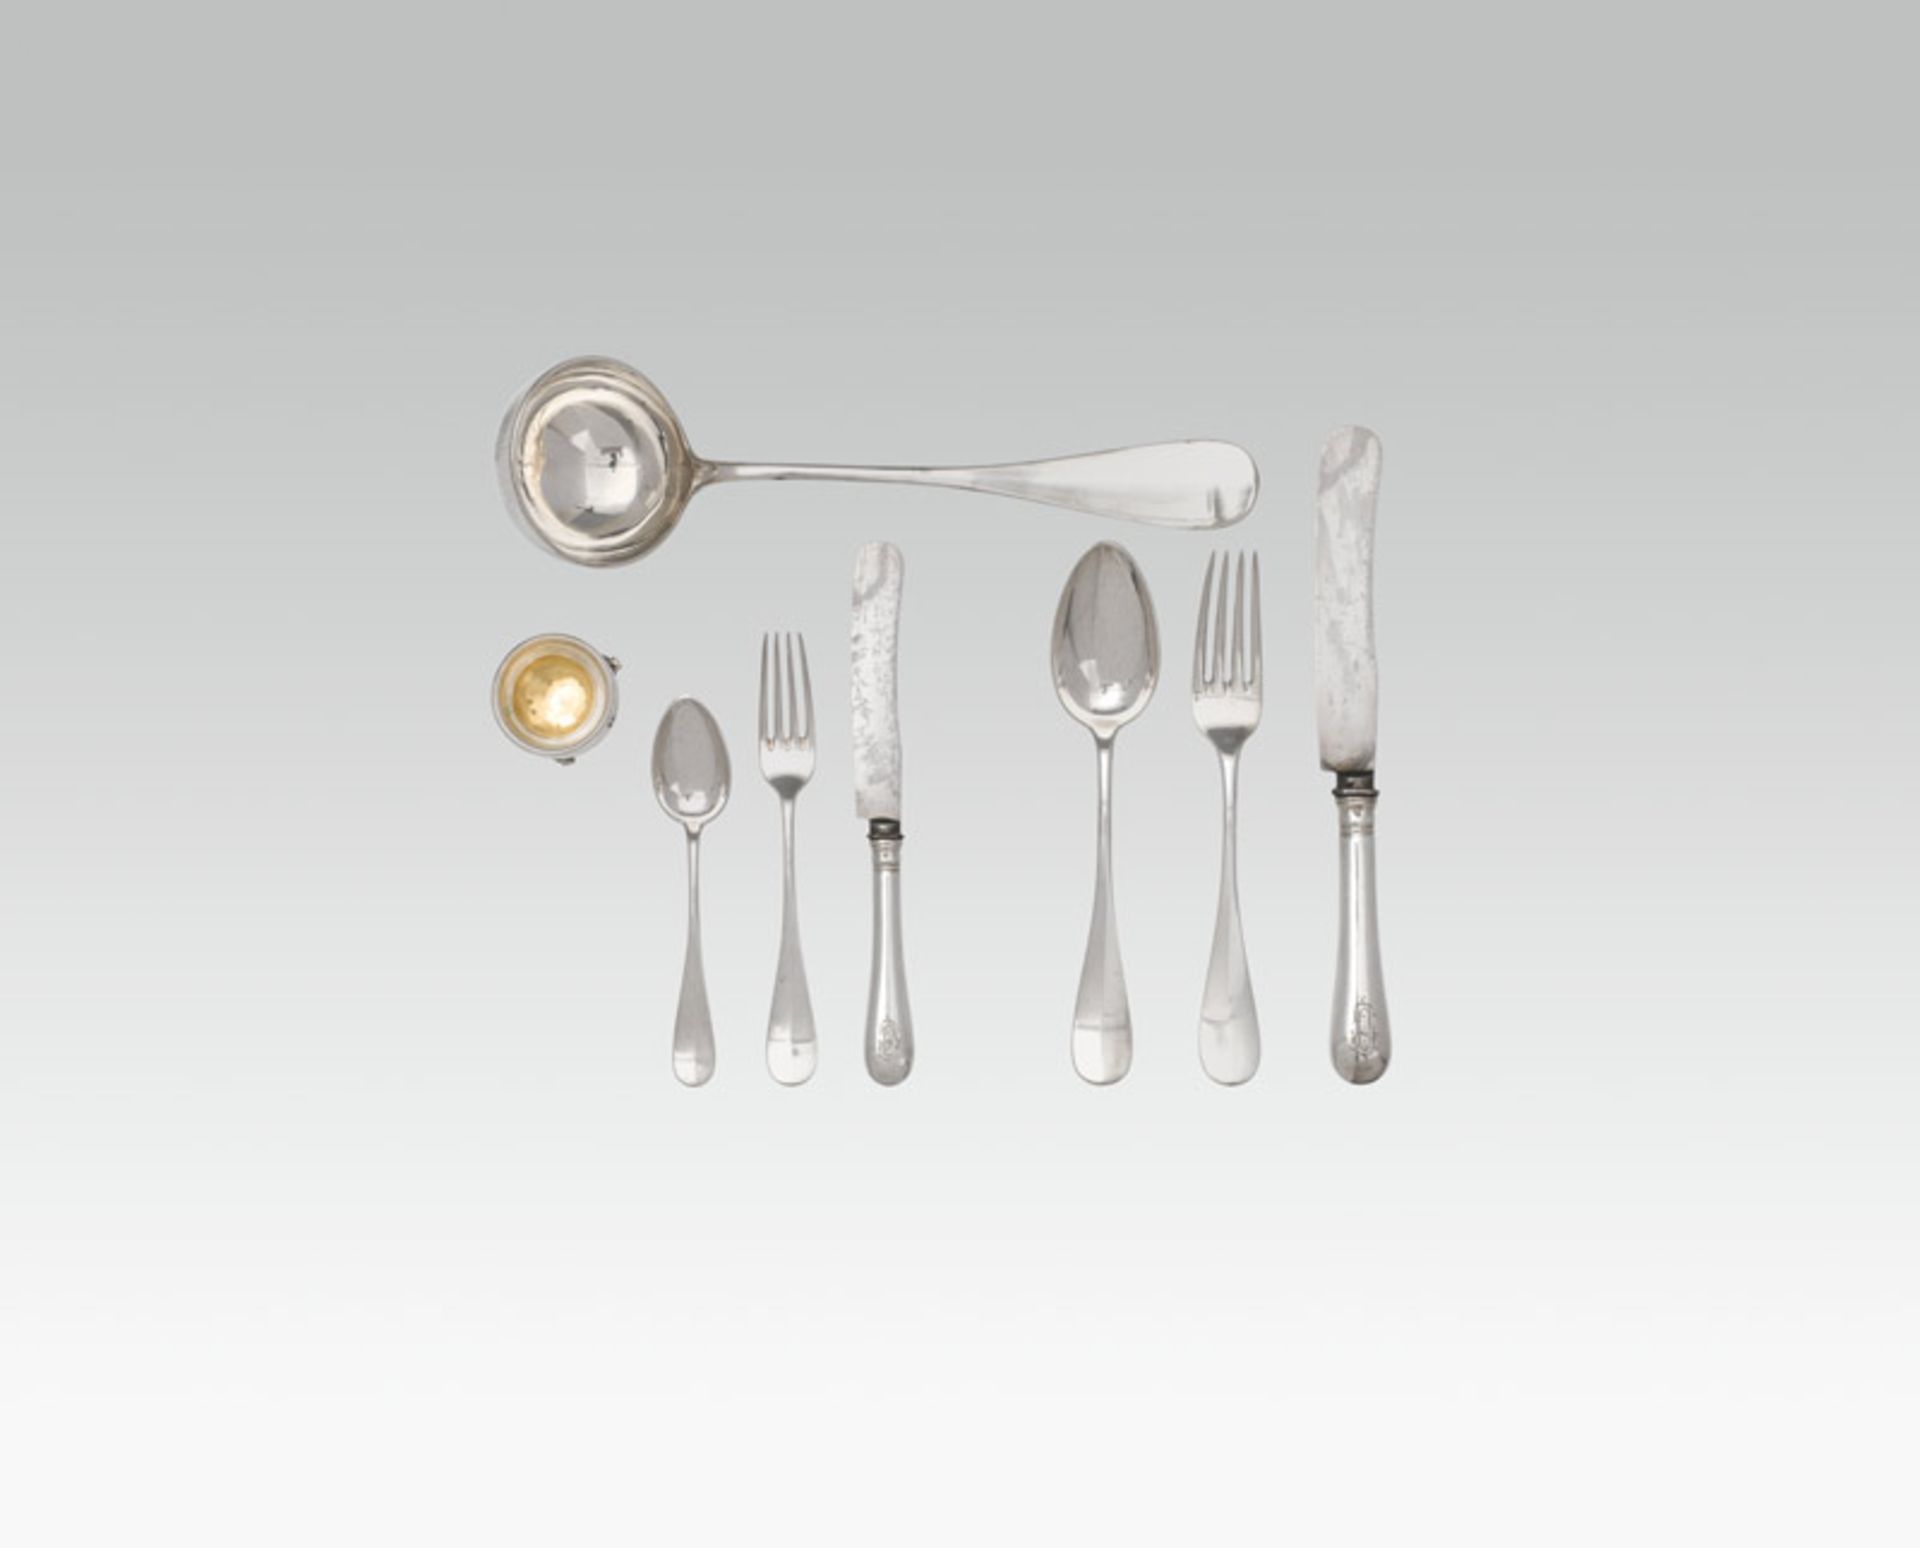 Table cutlery for 6 persons, Vienna, late 19th century